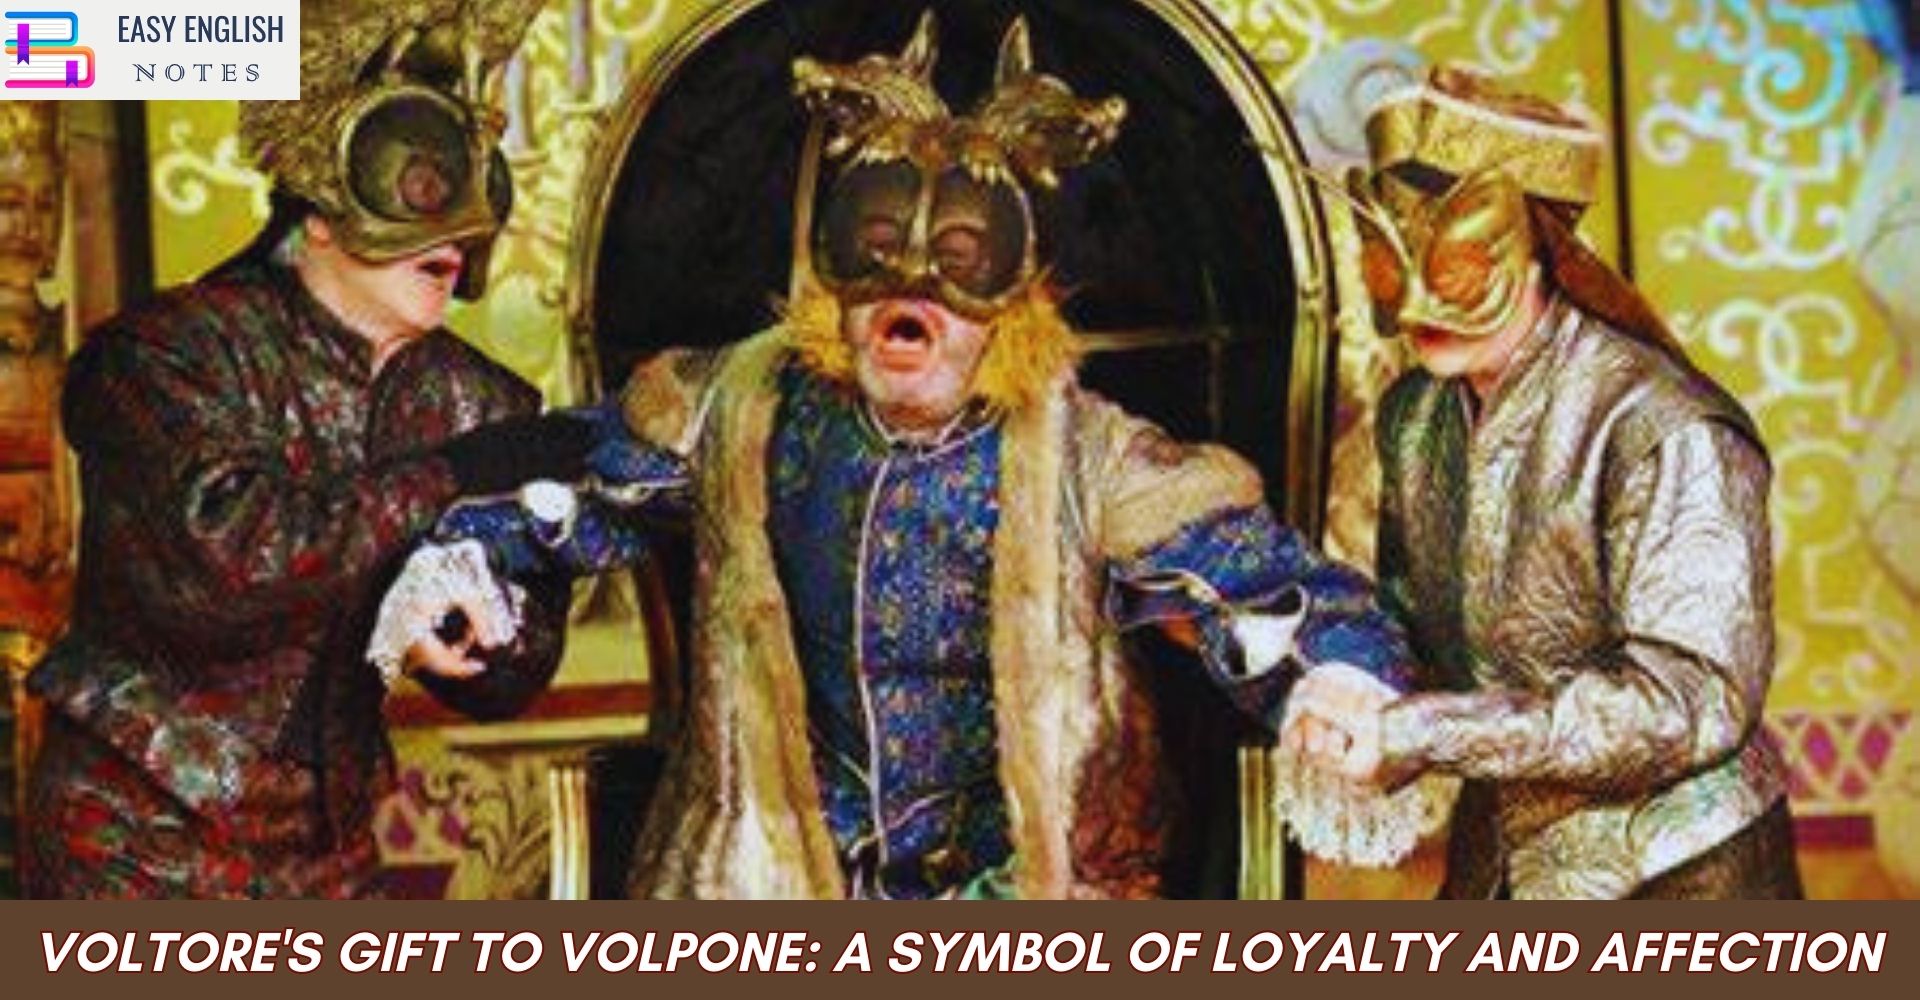 Voltore's Gift to Volpone: A Symbol of Loyalty and Affection